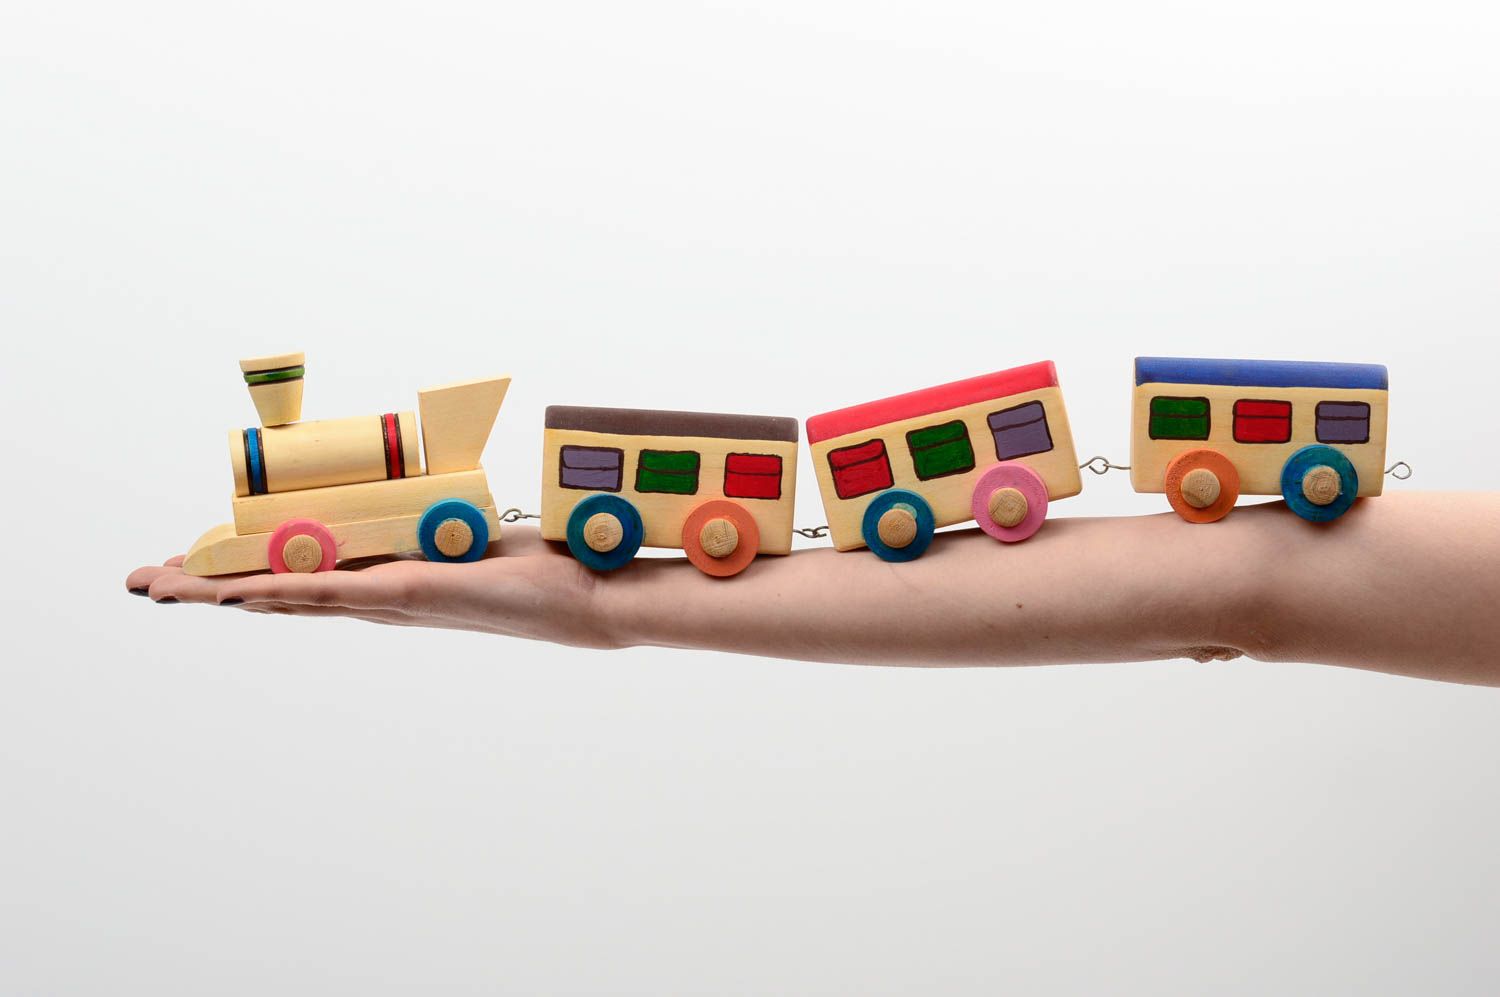 Wooden toy train handmade toy wooden toys for kids gifts for baby boy home decor photo 5